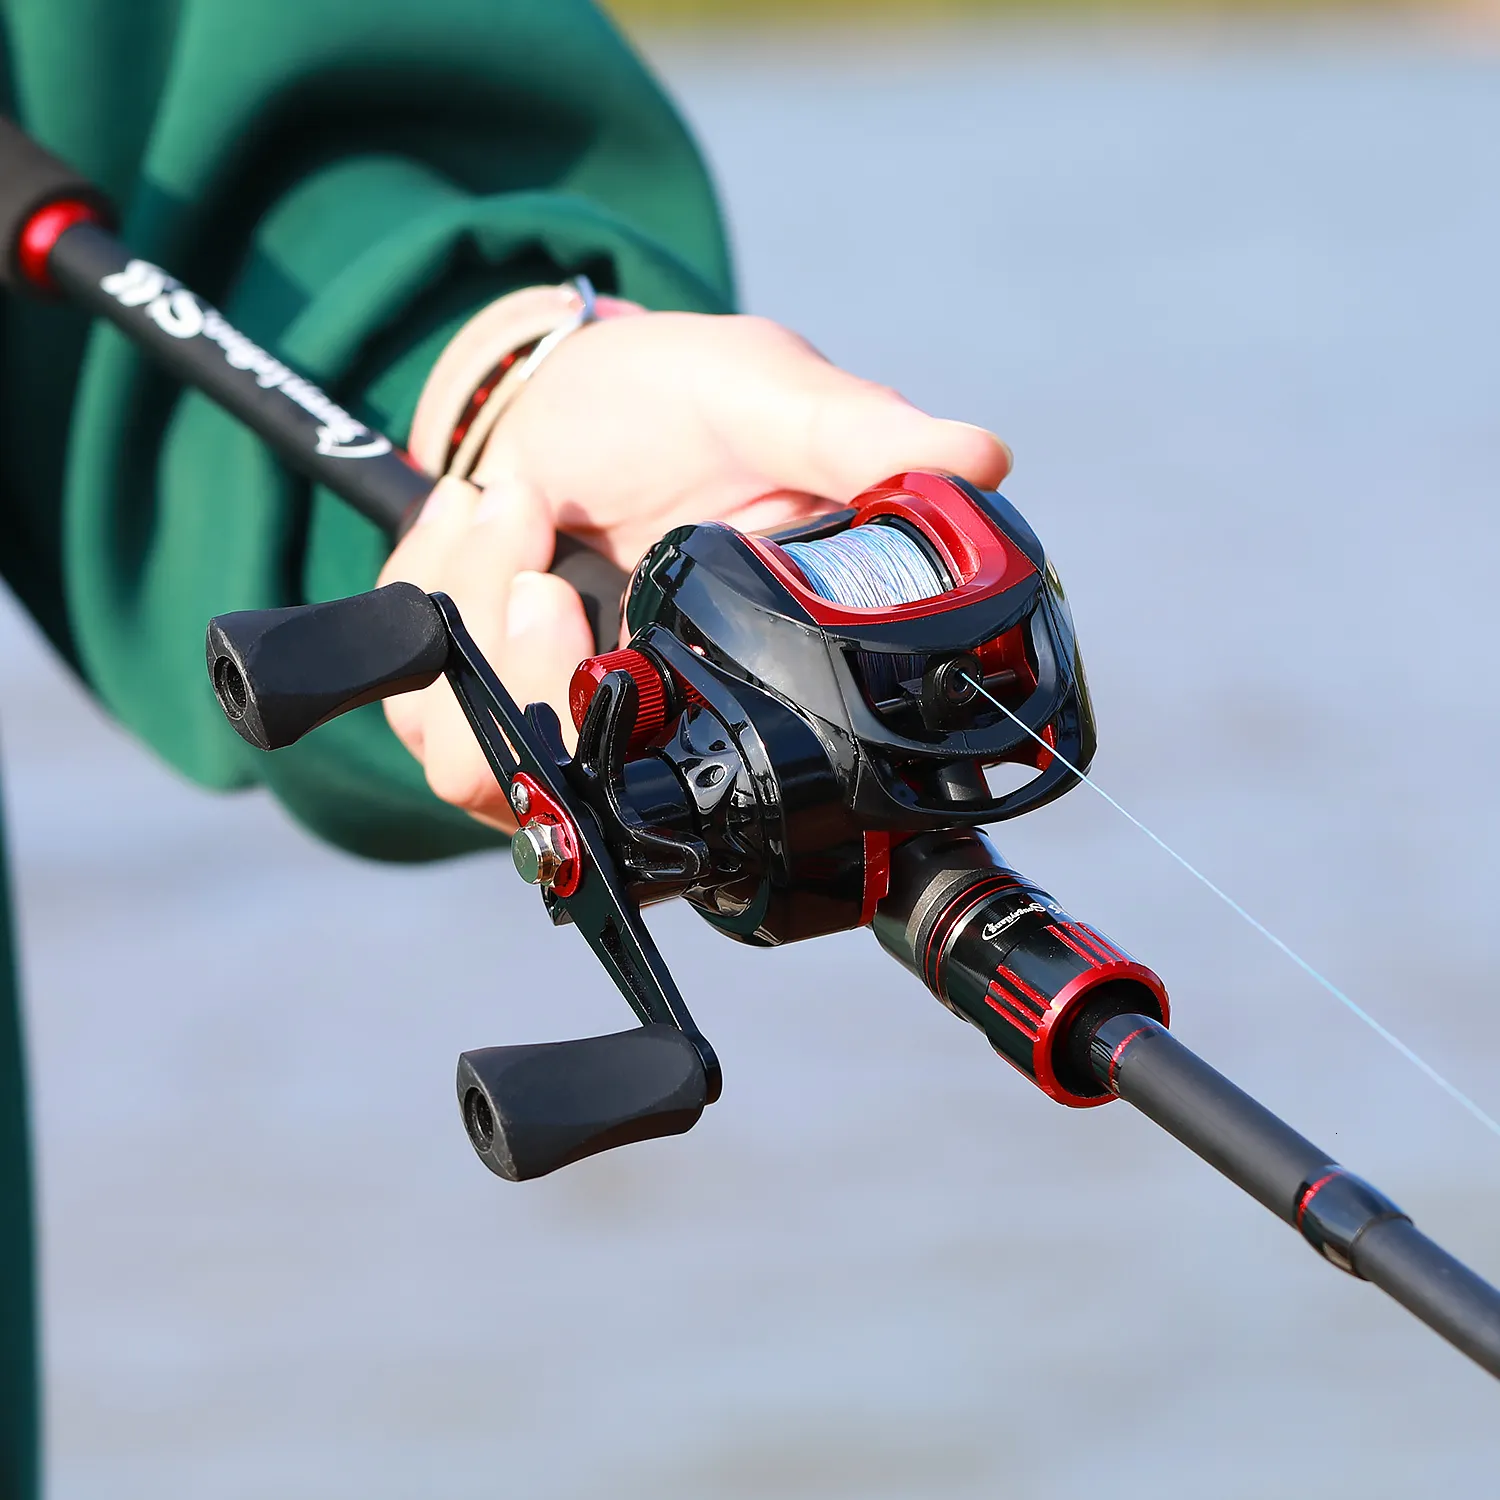 KastKing Royale Legend Fishing Rods - NEW Fishing Rods From